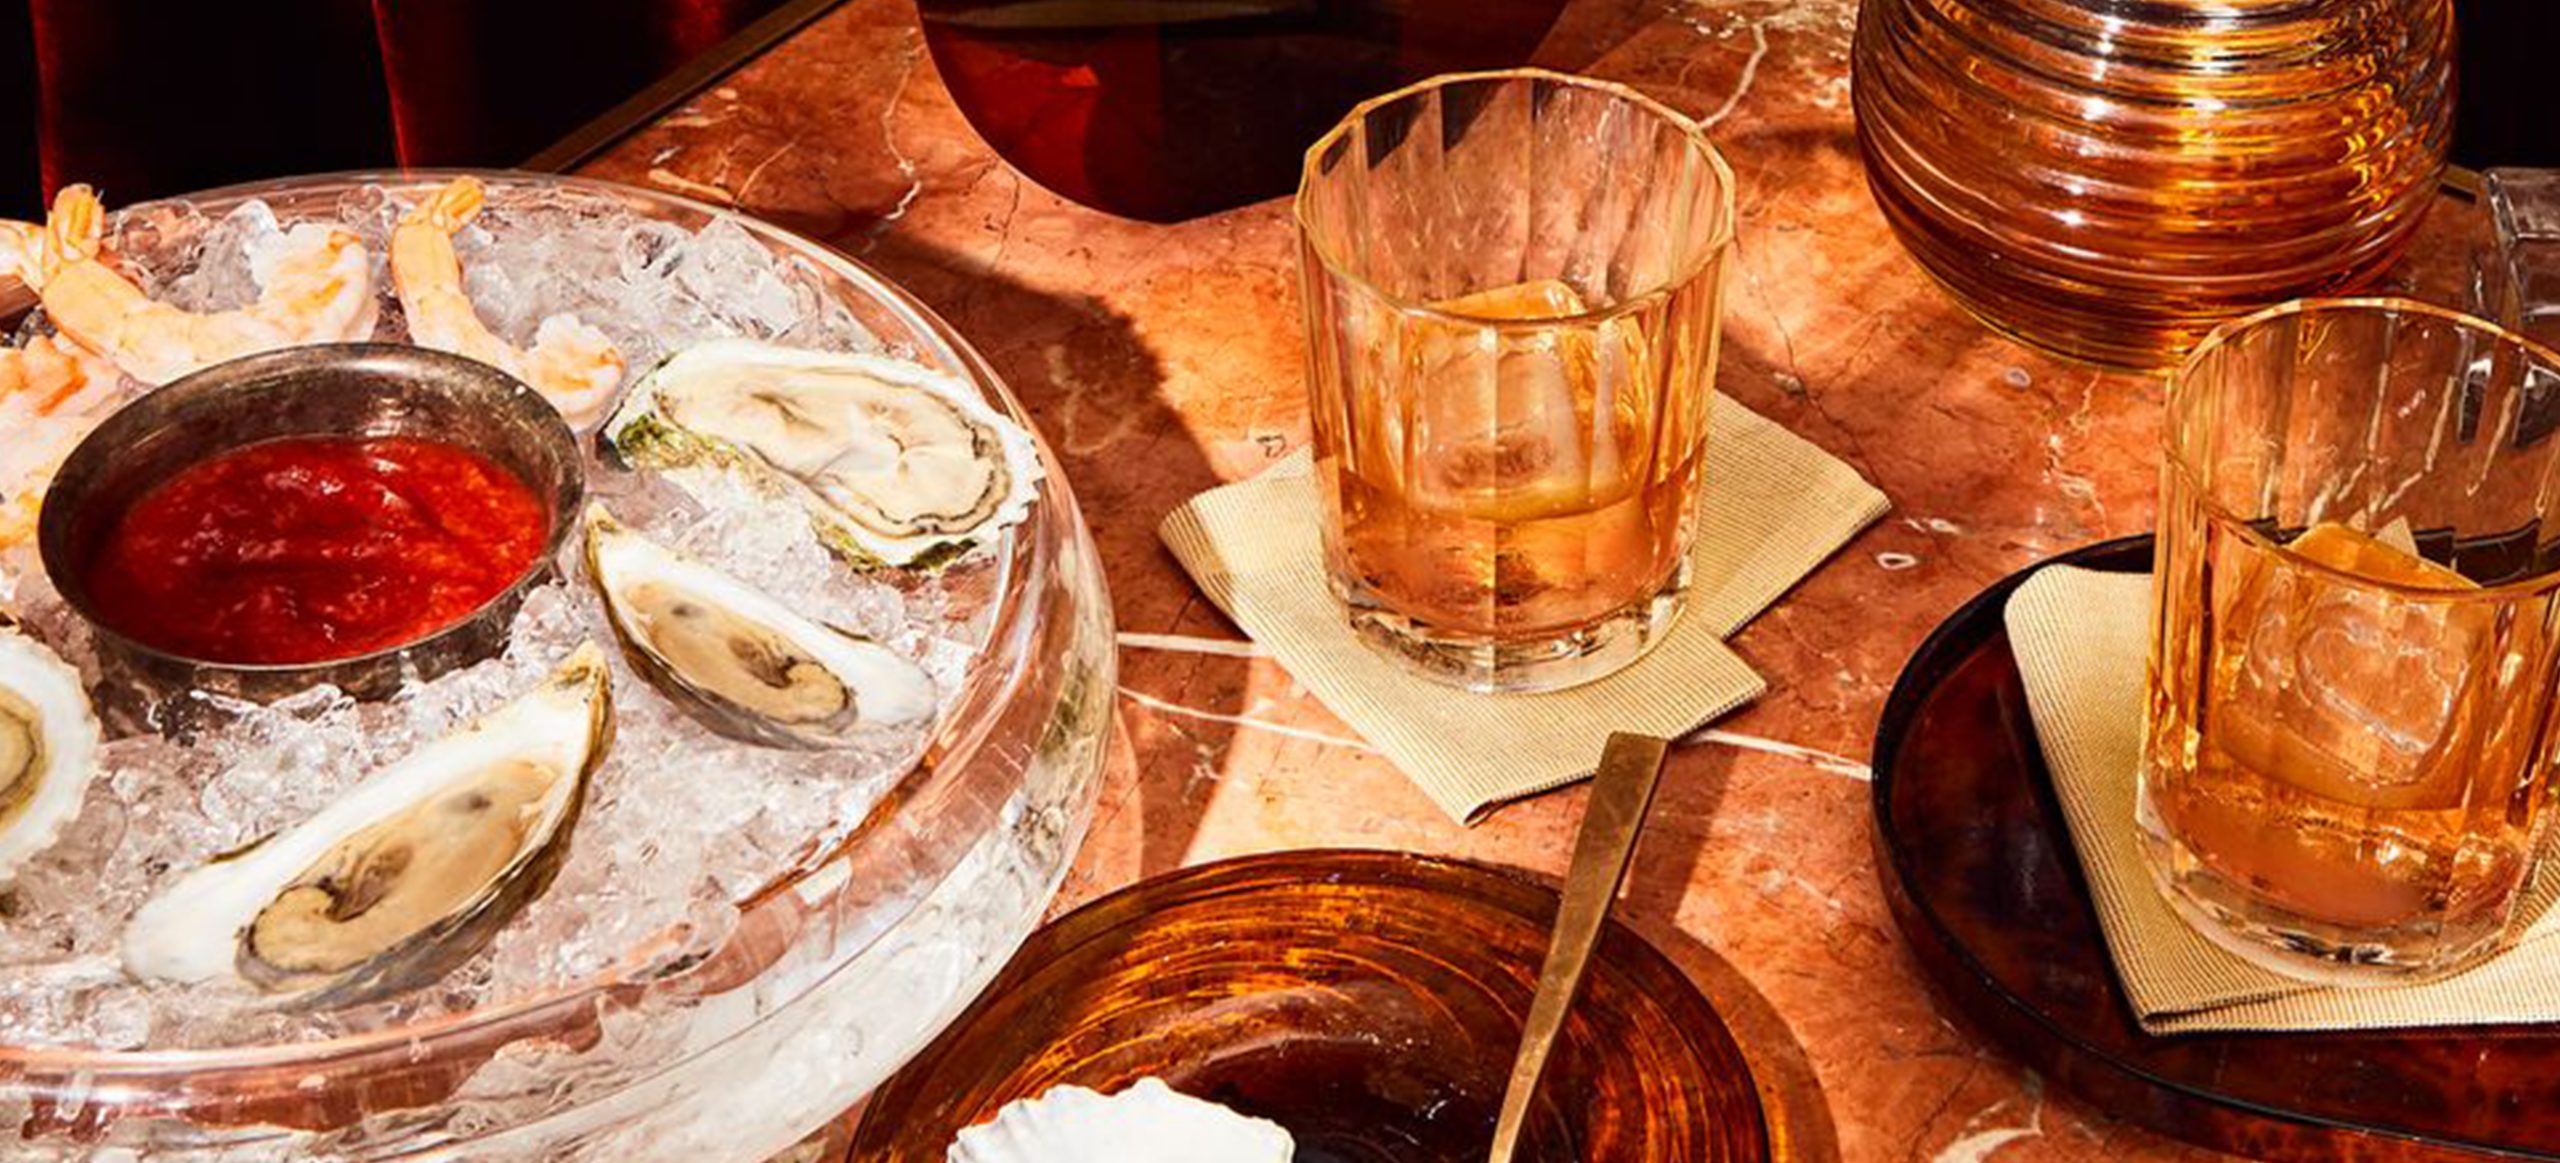 the glenlivet neat with oysters